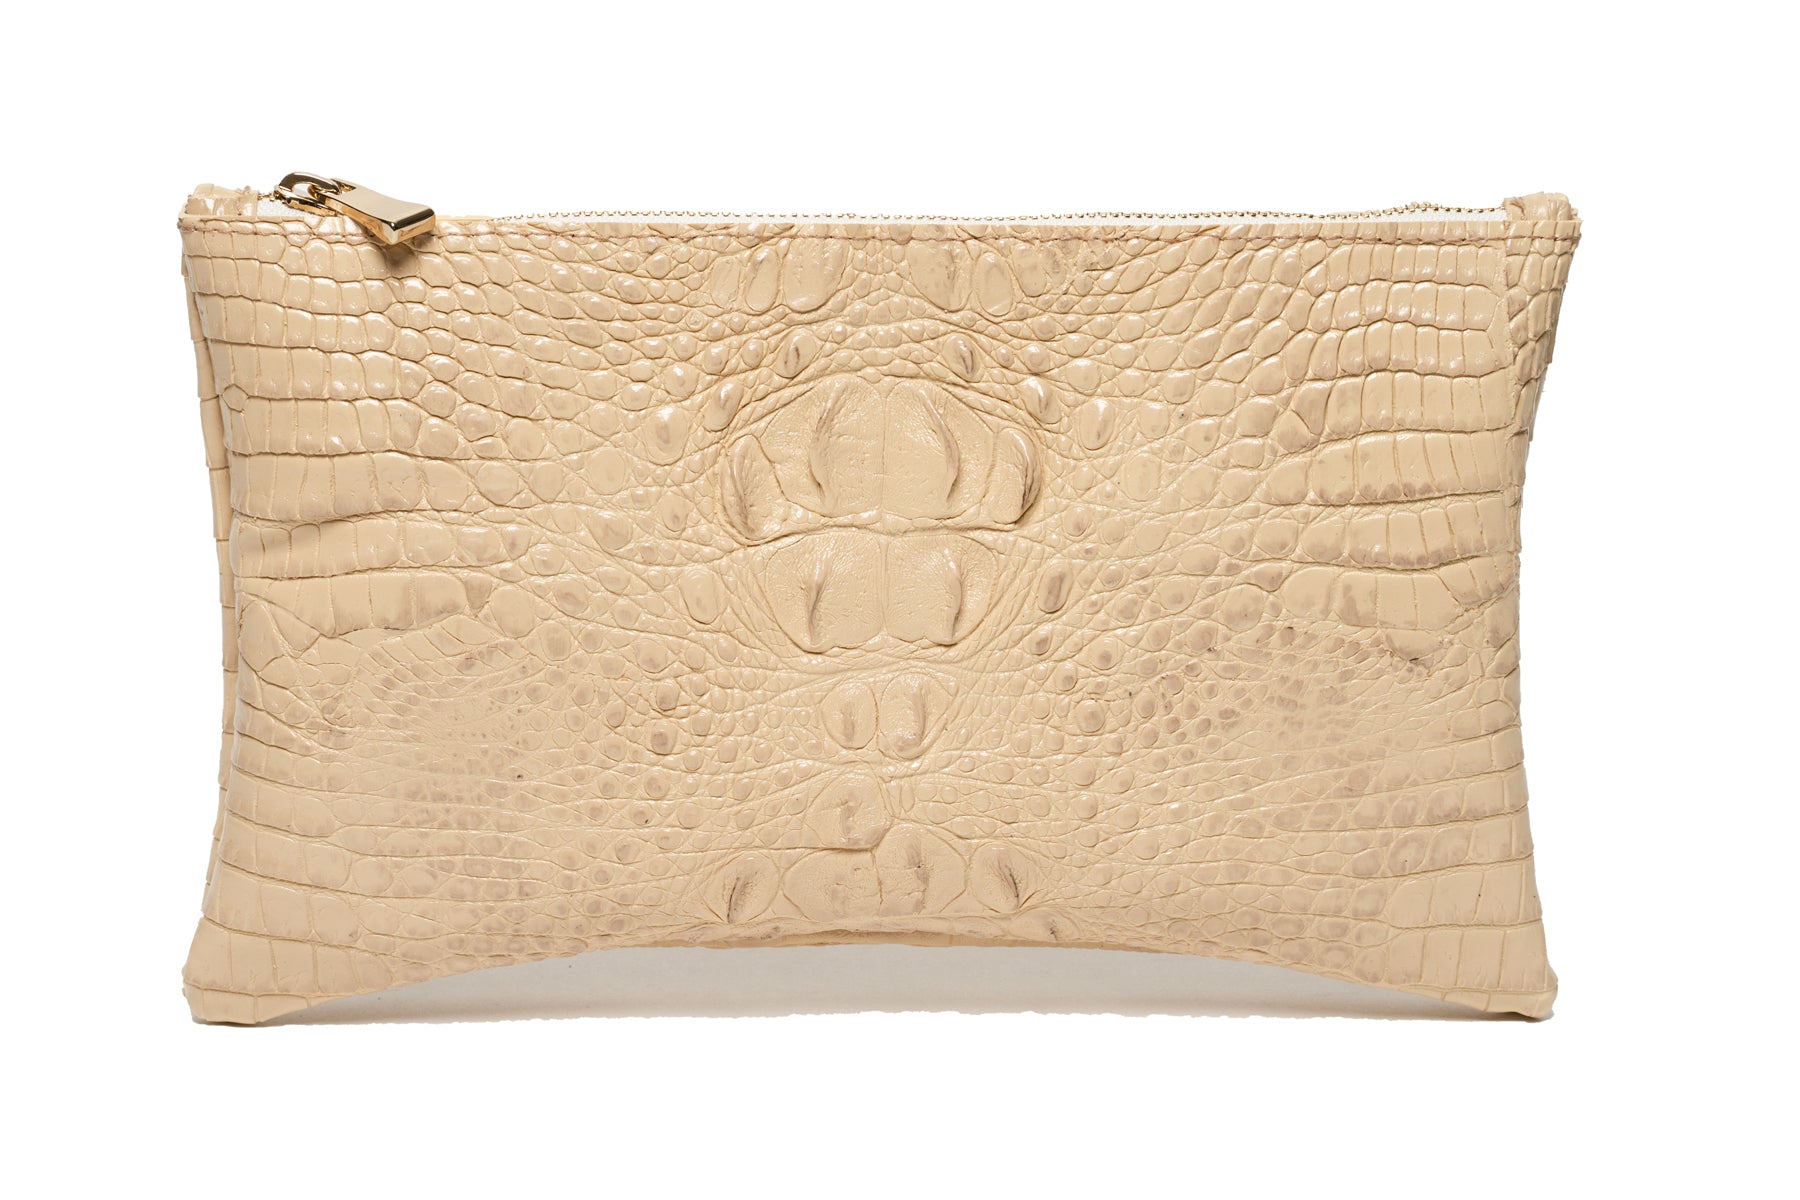 Small Clutch "Caiman"